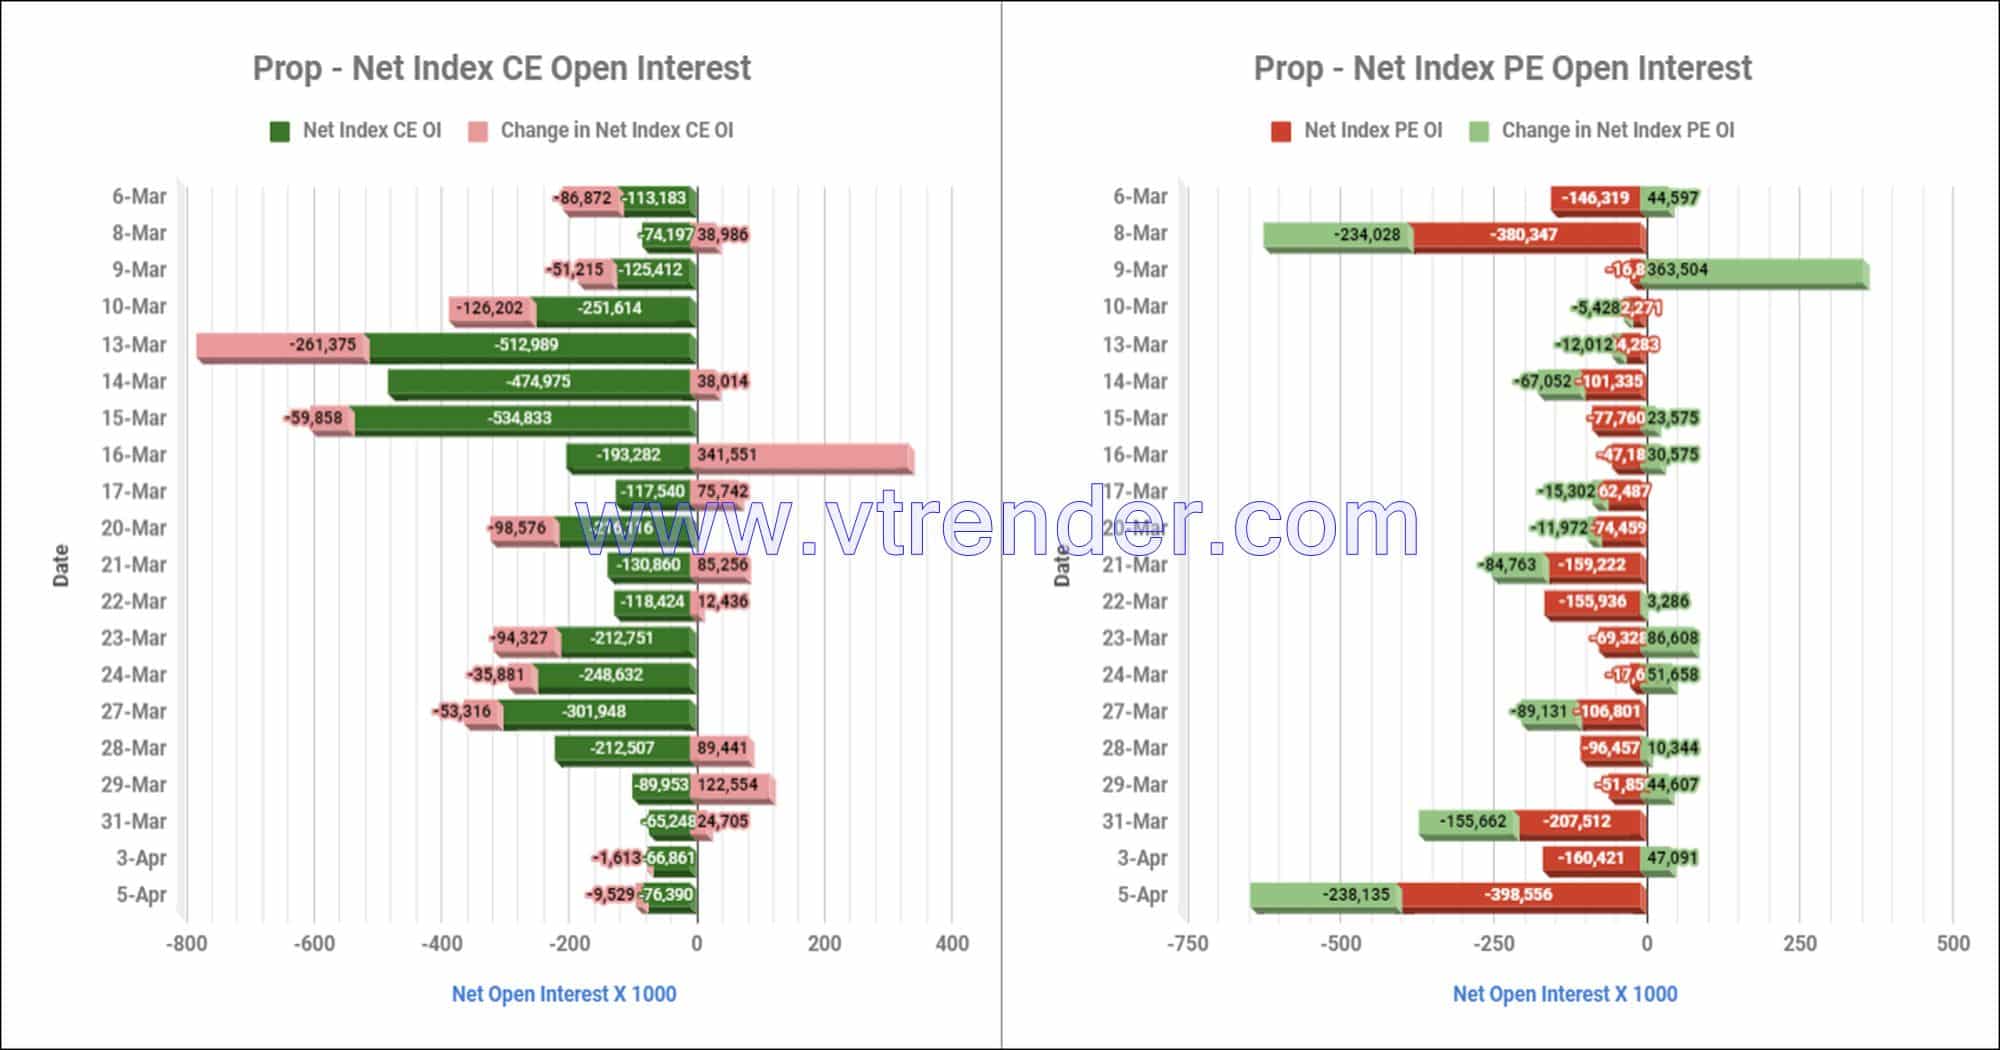 Proinop05Apr Participantwise Net Open Interest And Net Equity Investments – 5Th Apr 2023 Client, Equity, Fii, Index Futures, Index Options, Open Interest, Prop